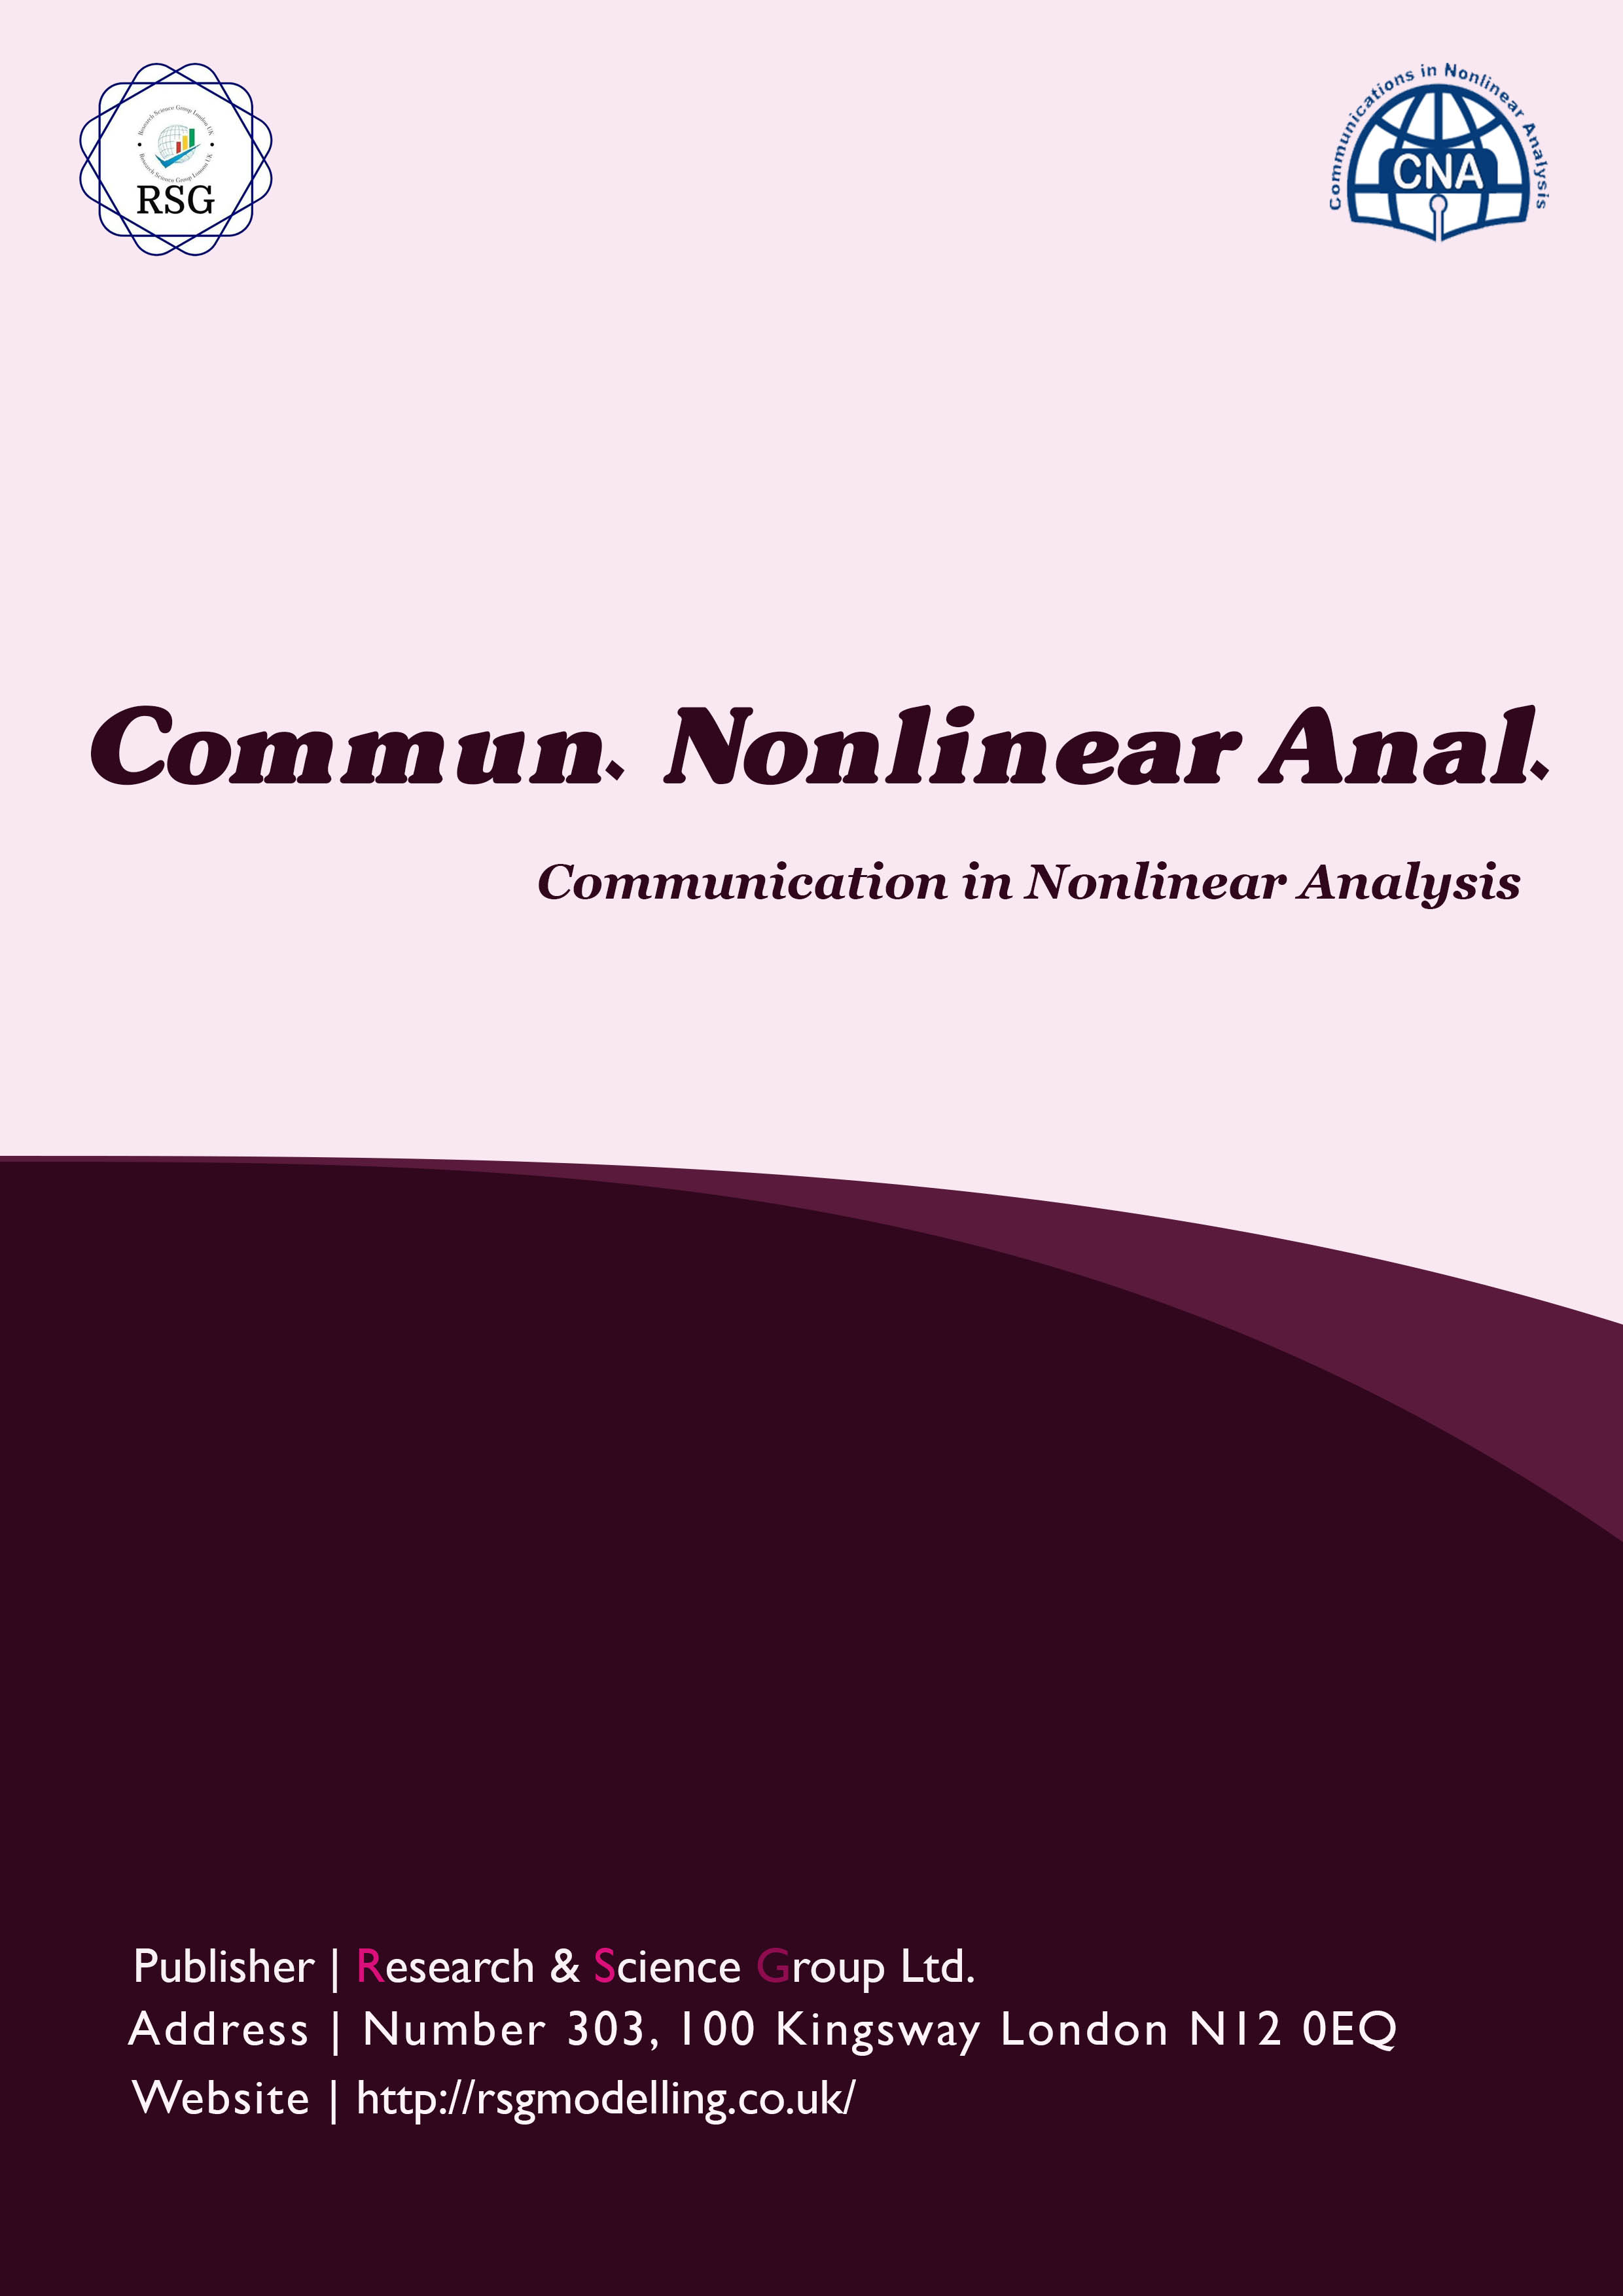 Communications in Nonlinear Analysis